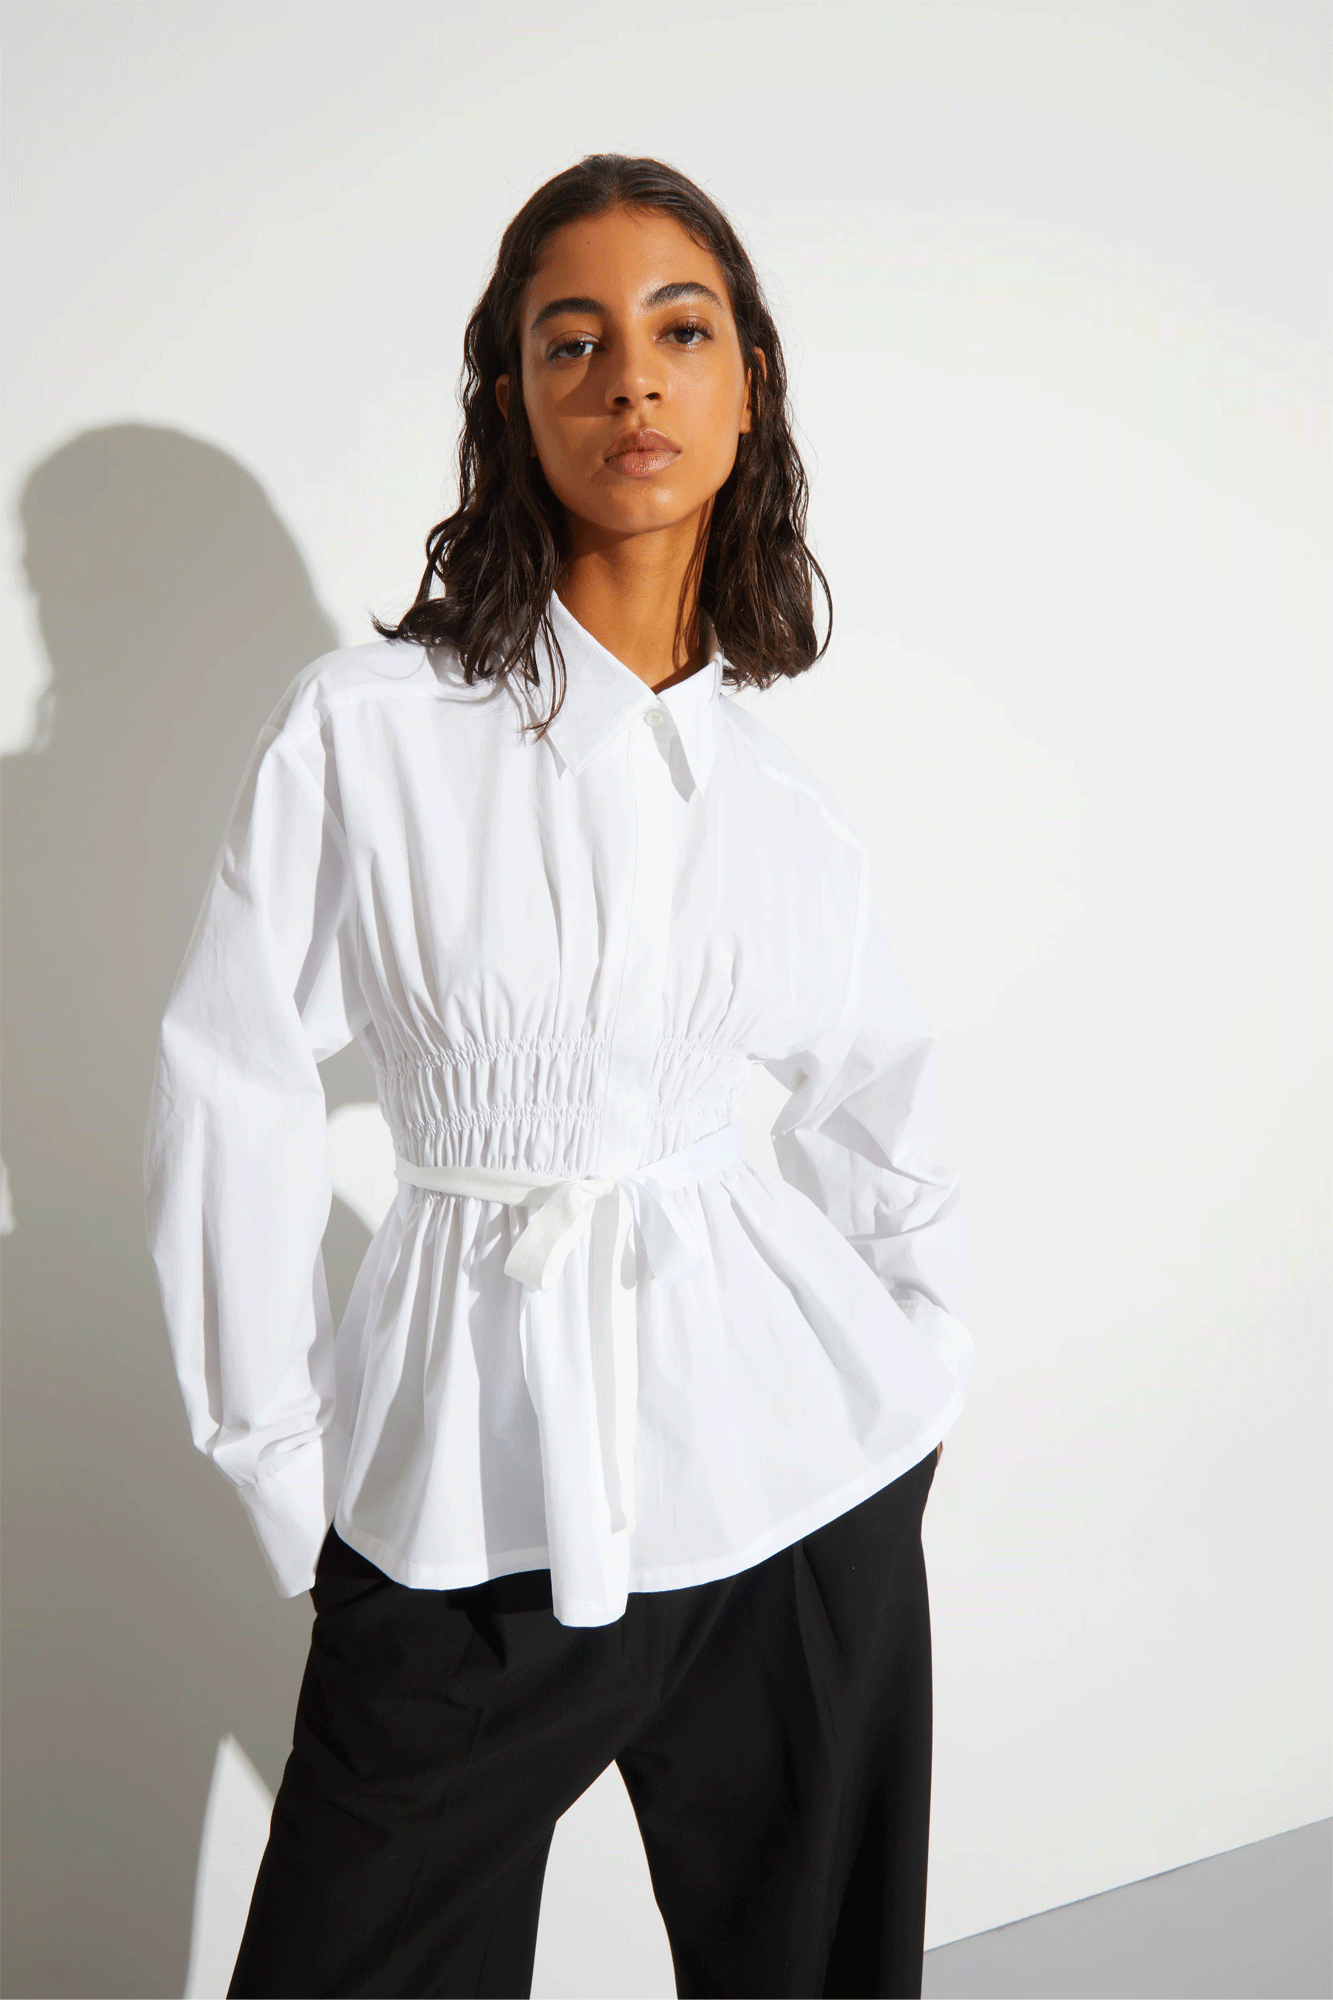 The Yvonne Ruched Front Tie Blouse from Saint Art is a fashionable and flattering piece. This unique button-down shirt is made from lightweight poplin fabric with ruched detailing and side slits for an adjustable fit. The streetwear inspired design gives you a tailored look with a feminine twist.